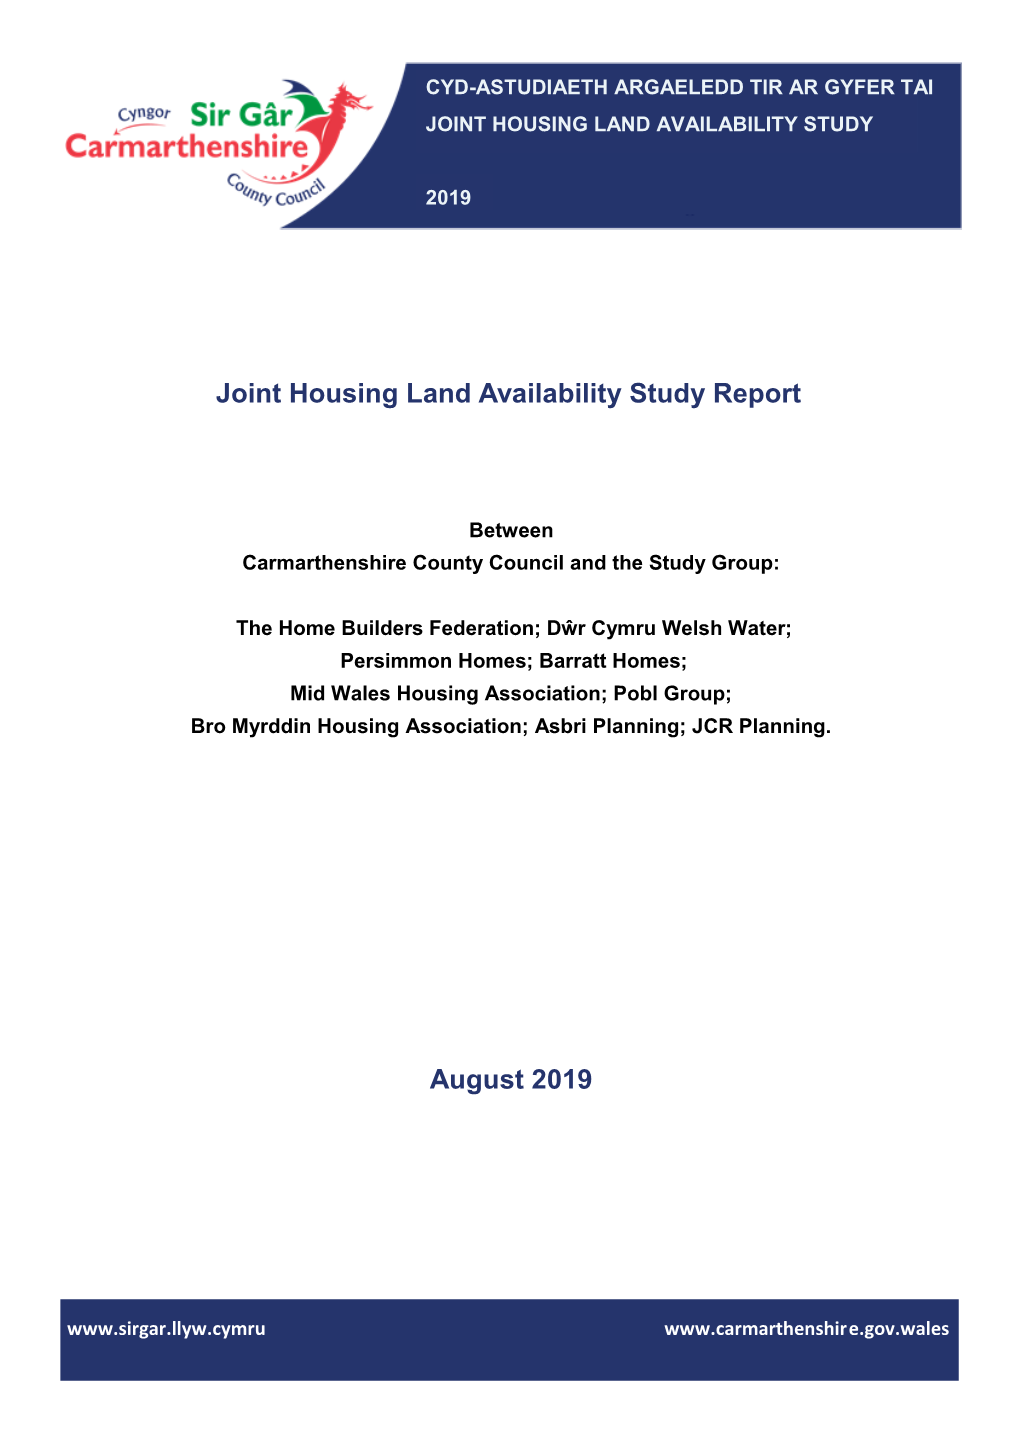 August 2019 Joint Housing Land Availability Study Report